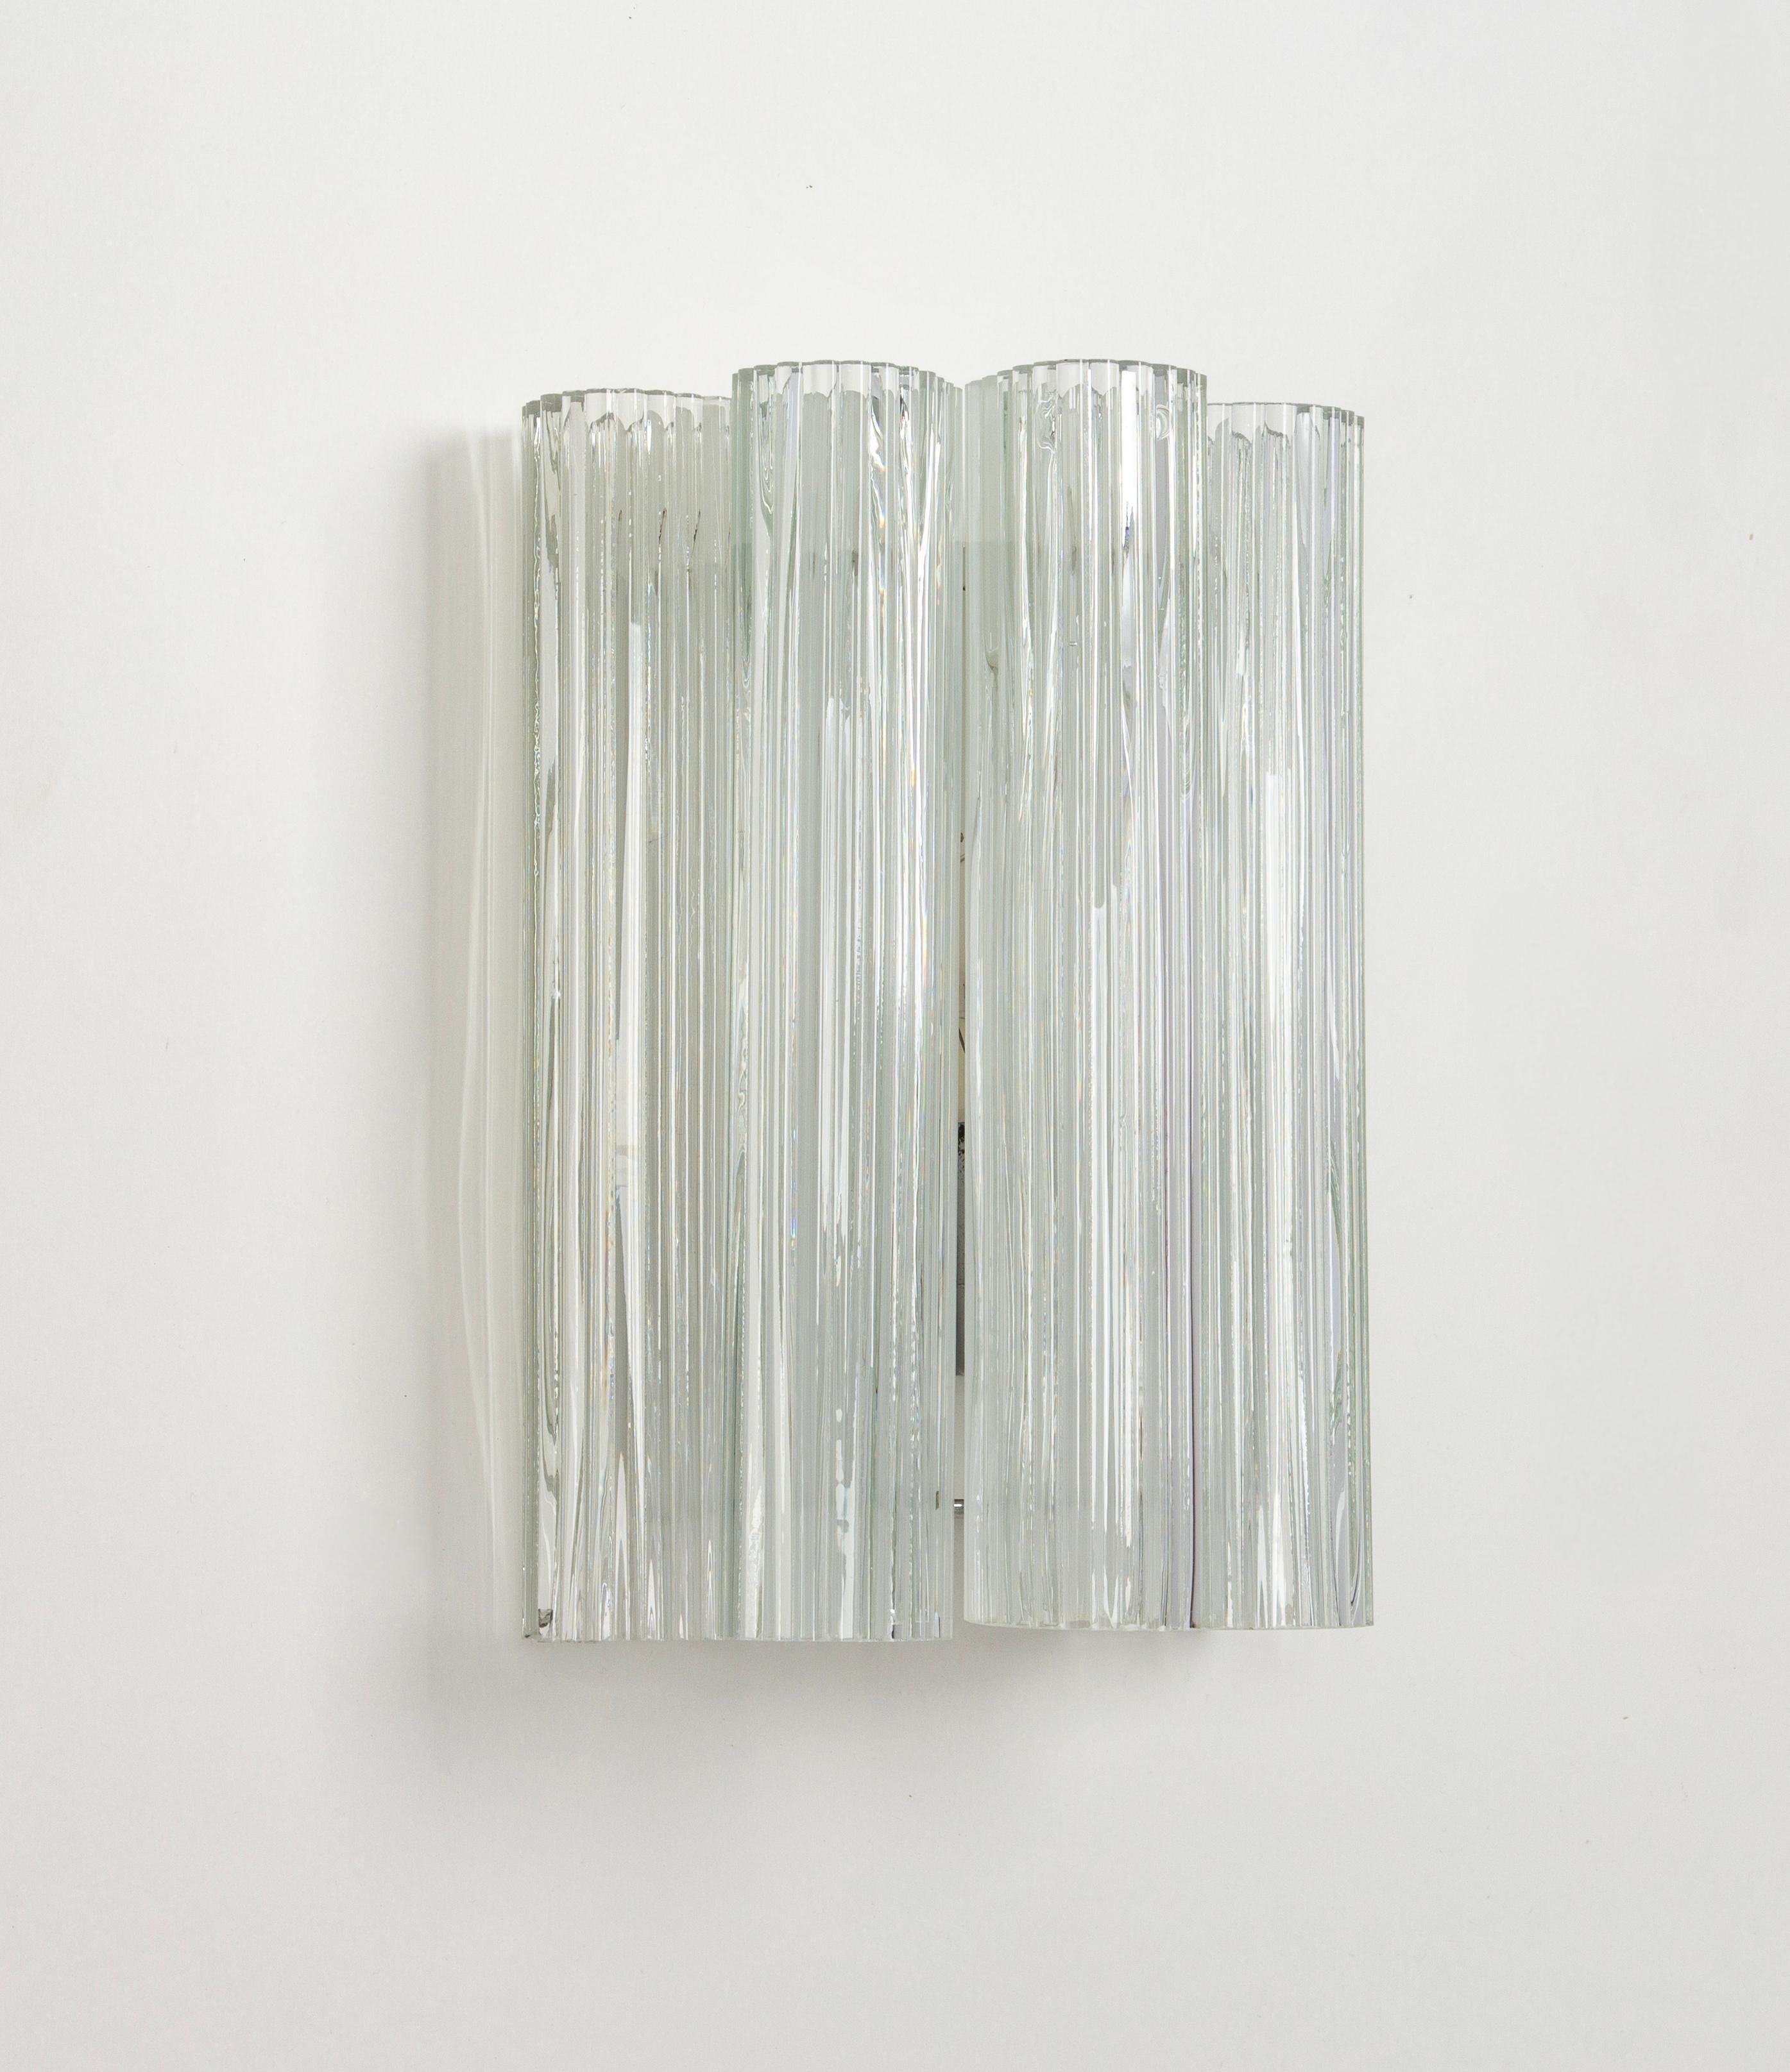 Mid-Century Modern 1 of 4 Large Murano Glass Wall Sconces by Doria, Germany, 1960s For Sale